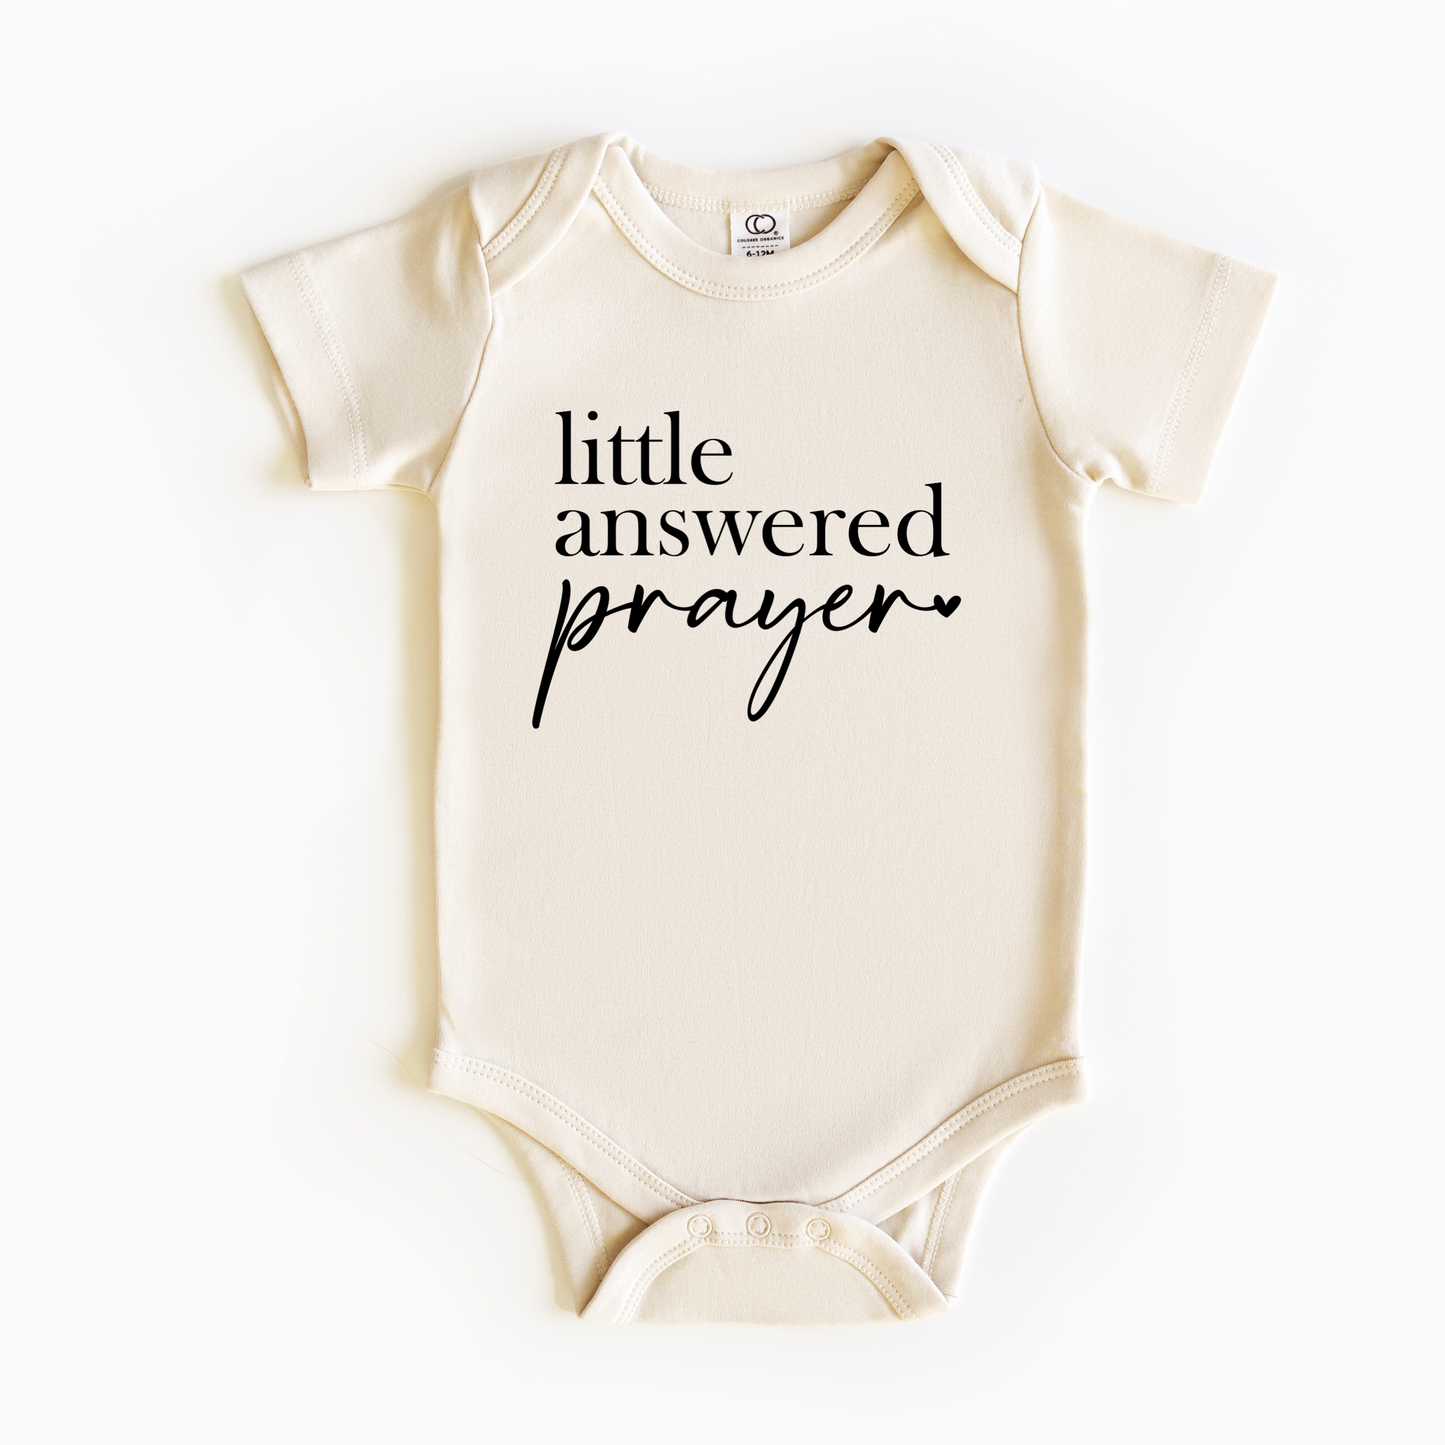 Little Answered prayer Baby Onepiece for Pregnancy Announcement